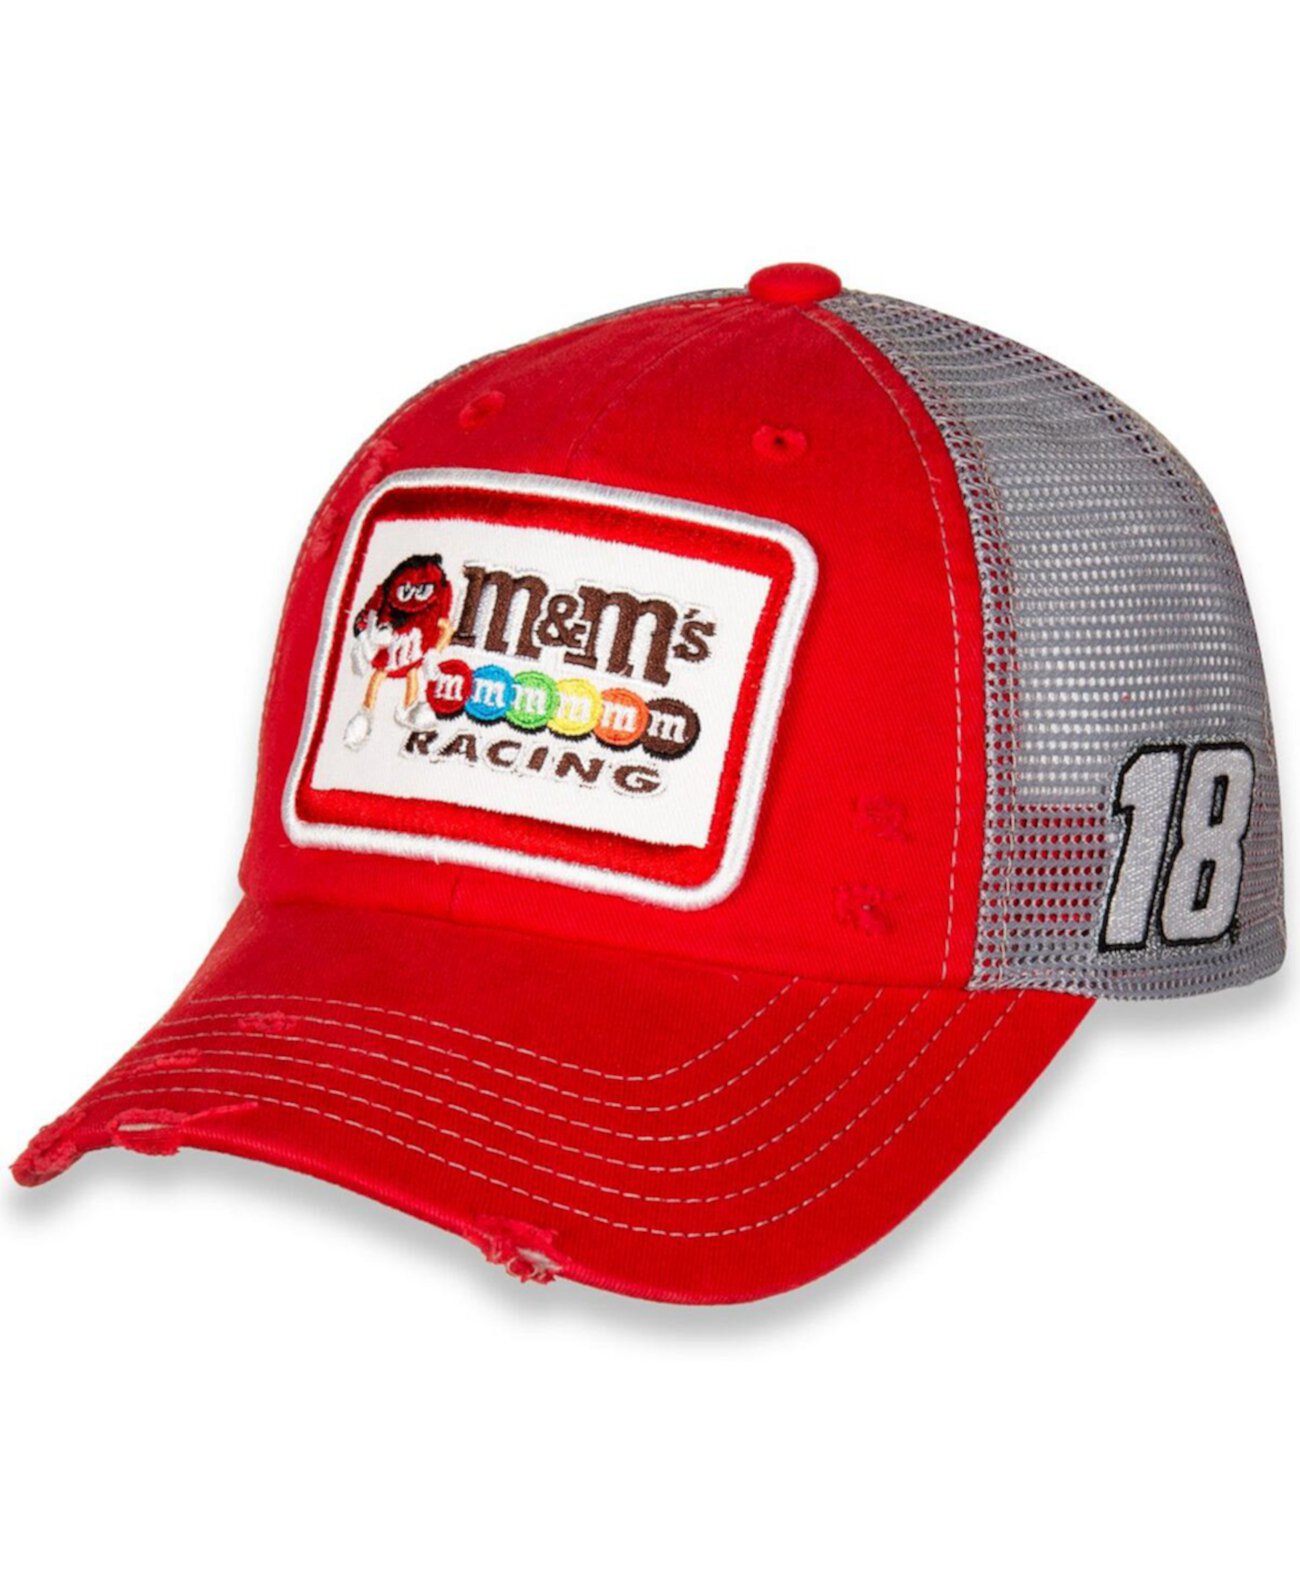 Men's Red, Gray Kyle Busch M&Ms Vintage-Like Patch Snapback Adjustable Hat Joe Gibbs Racing Team Collection